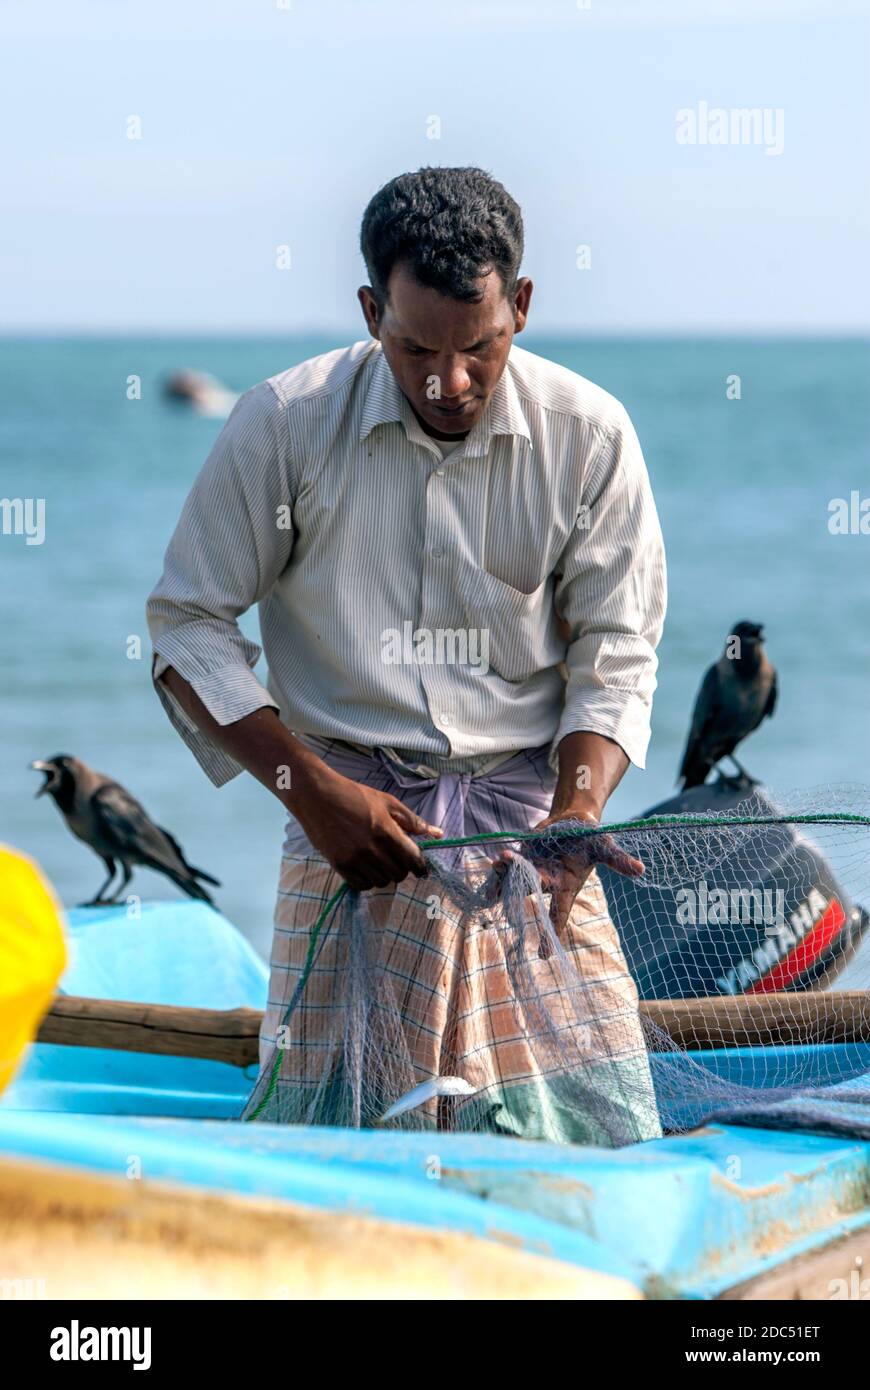 A fisherman gathering a fishing net on Arugam Bay beach in the